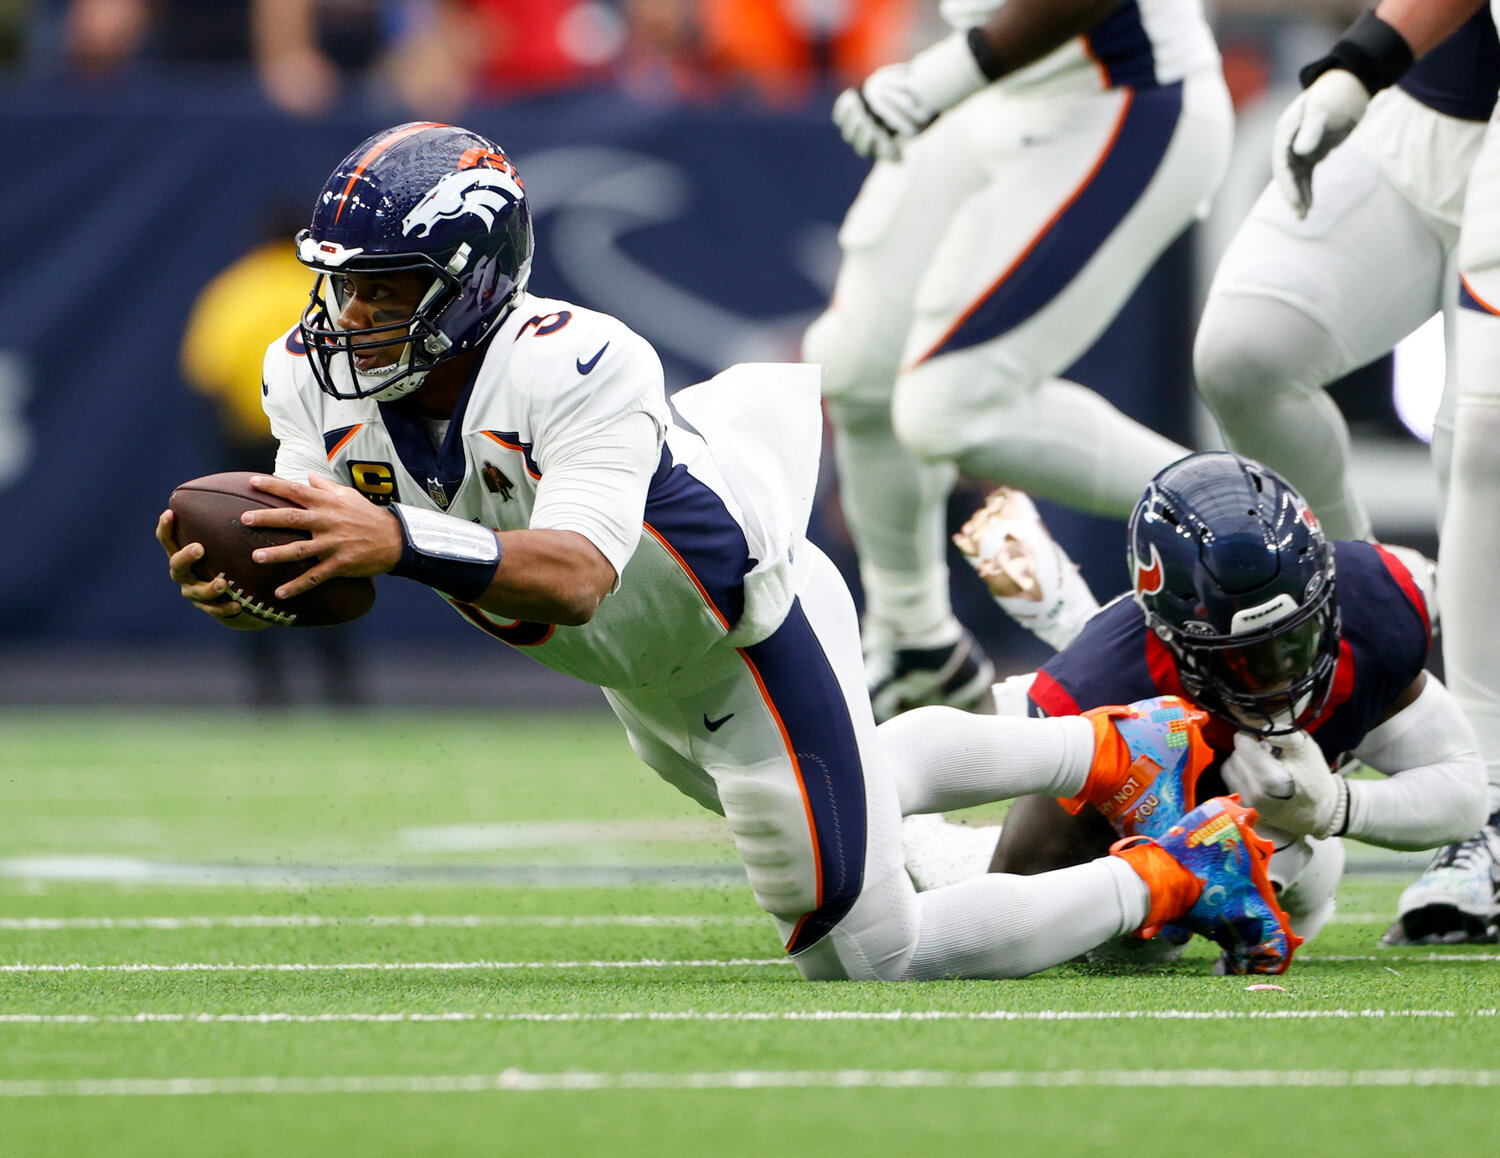 Broncos quarterback Russell Wilson (3) dives forward for a first down during an NFL game between the Texans and the Broncos on December 3, 2023 in Houston. The Texans won, 22-17.